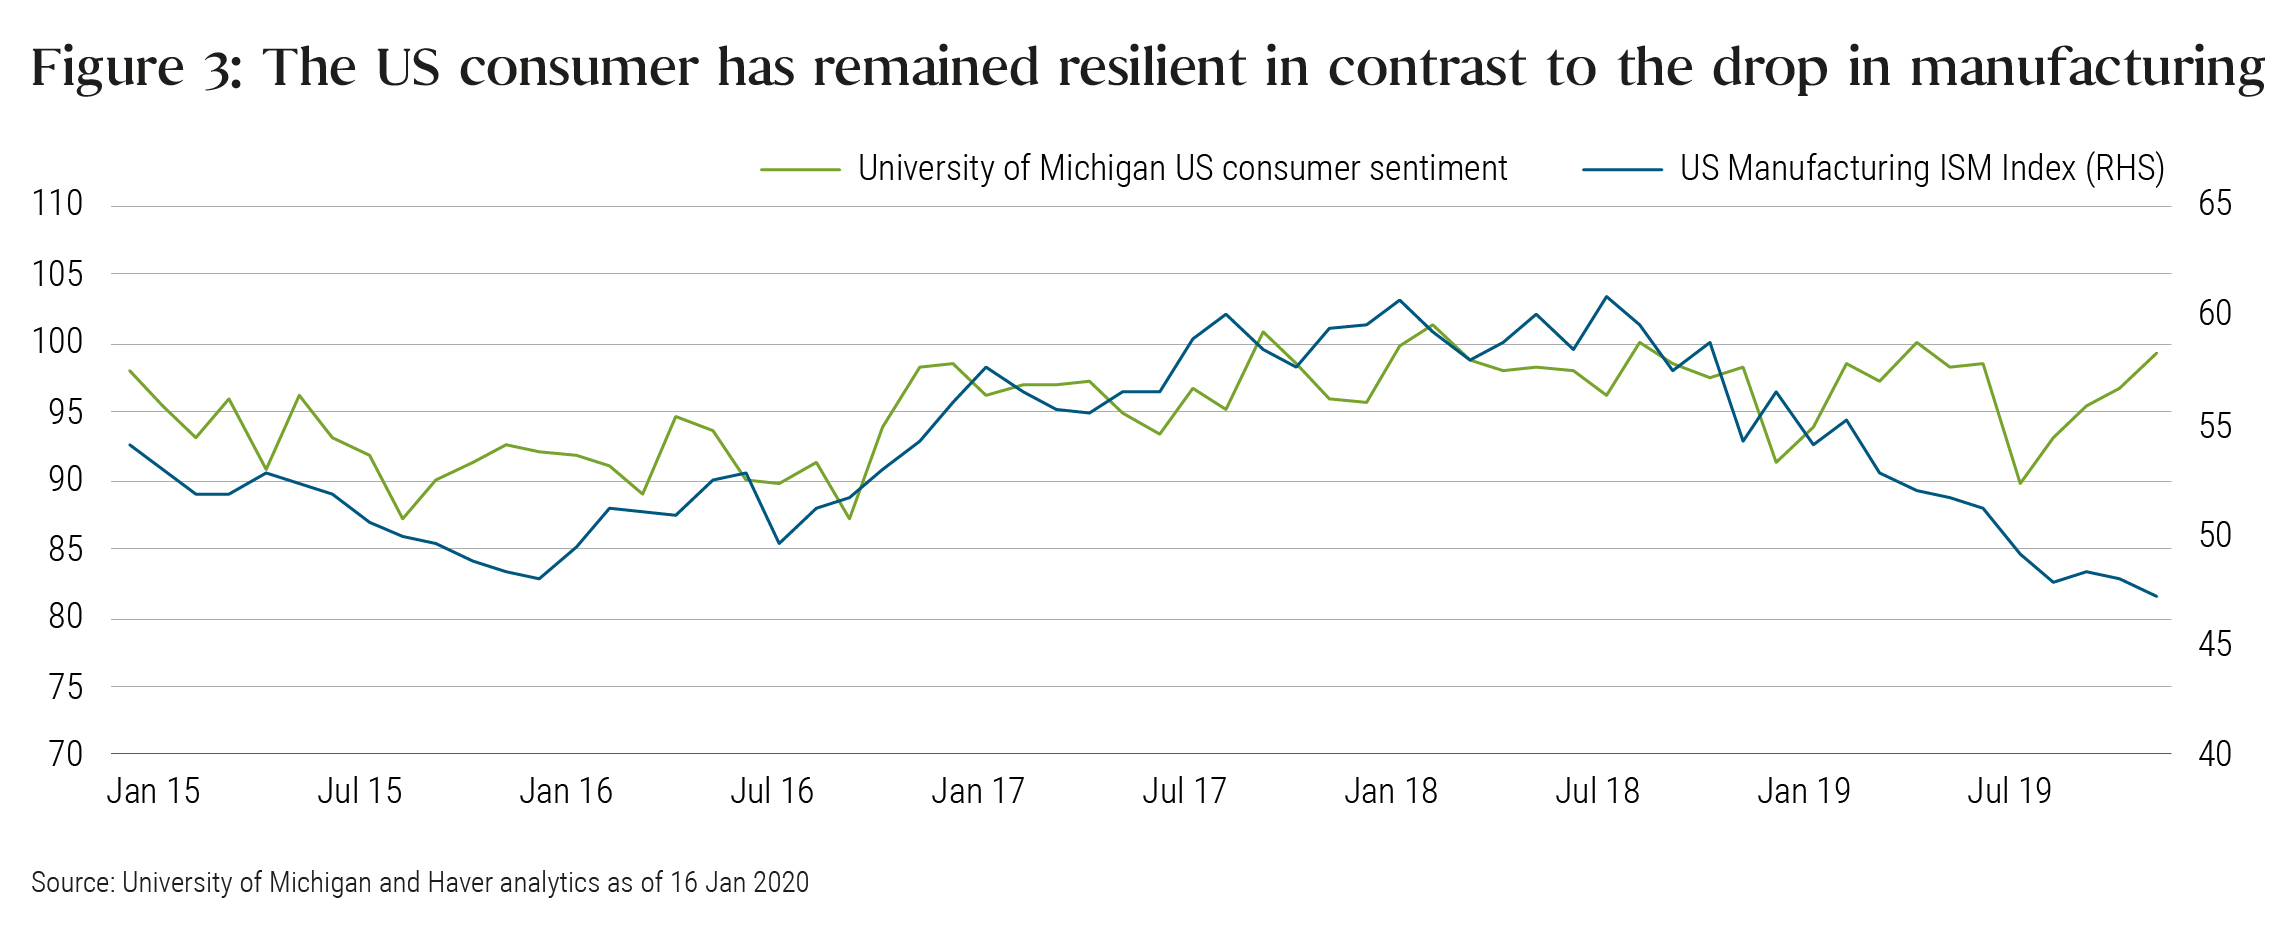 Figure 3 shows a graph contrasting consumer sentiment with a manufacturing index. From January 2015 to January 2019, the University of Michigan US consumer sentiment and the US Manufacturing ISM Index fluctuated roughly in tandem. Afterwards, the two measures started to diverge, with consumer sentiment registering higher relative to manufacturing. By mid-January 2020, the difference between the two is at a maximum on the graph.